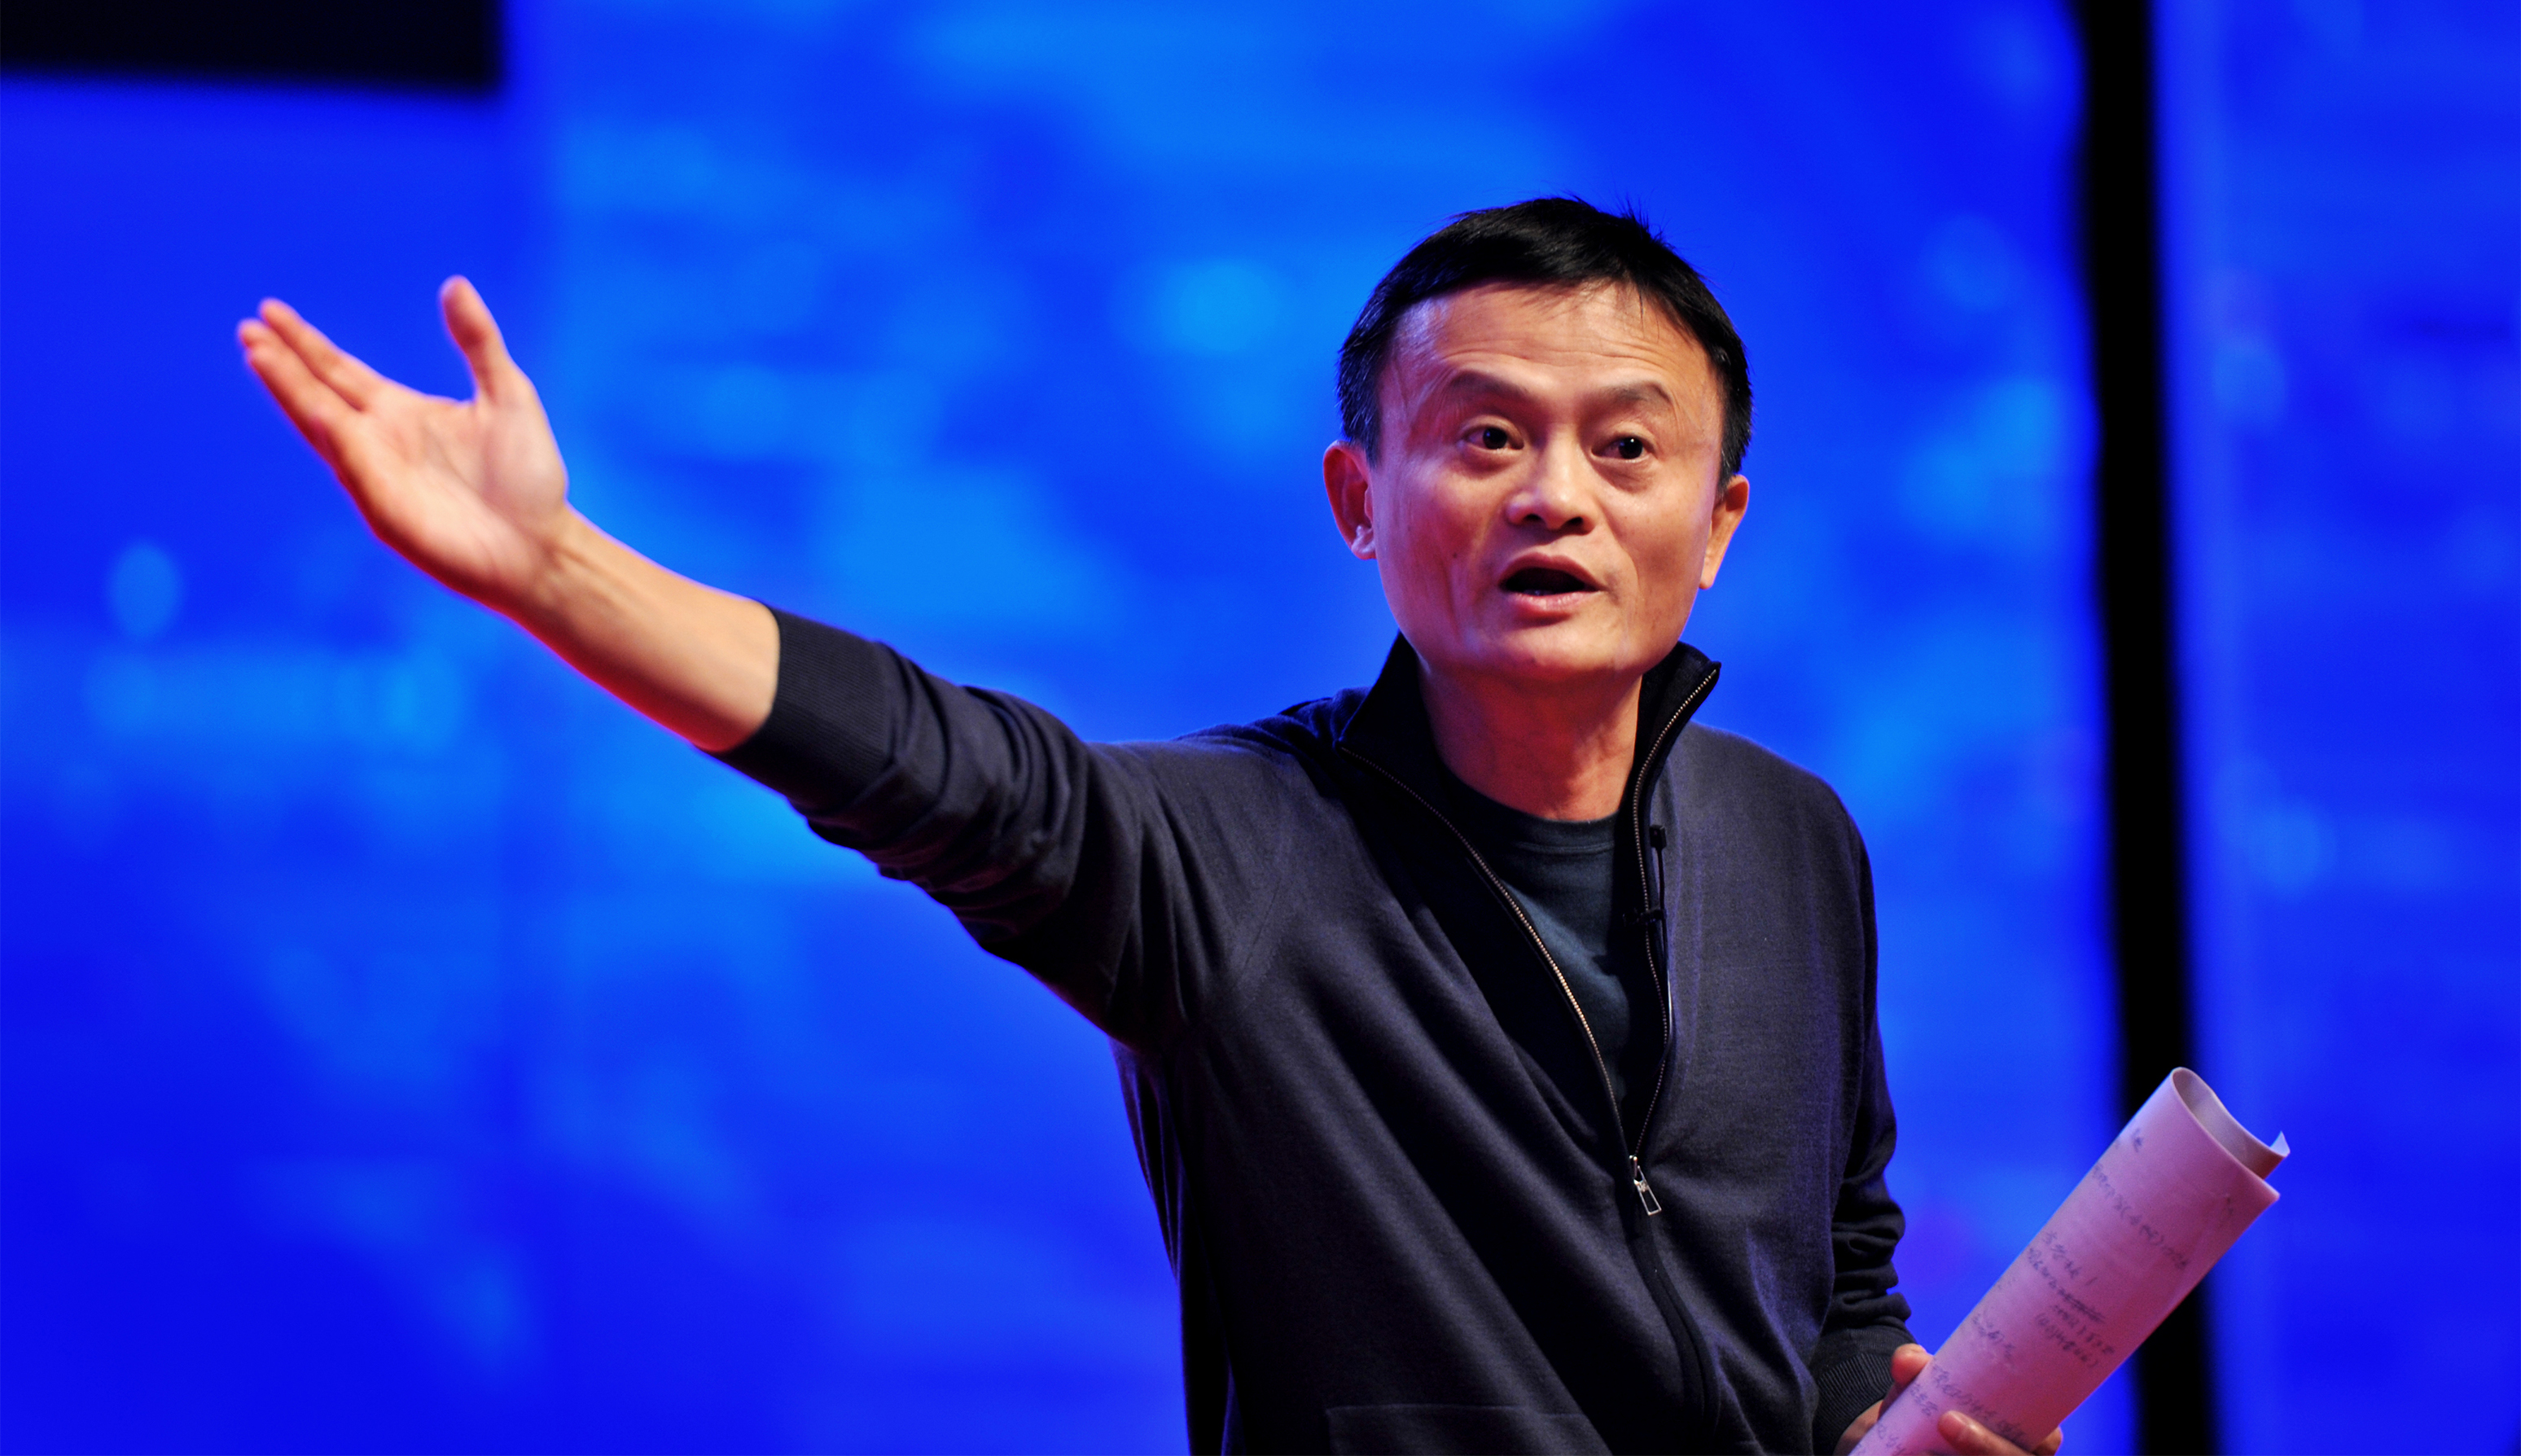 Alibaba’s Jack Ma tops Fortune China’s list of influential business leaders in 2020